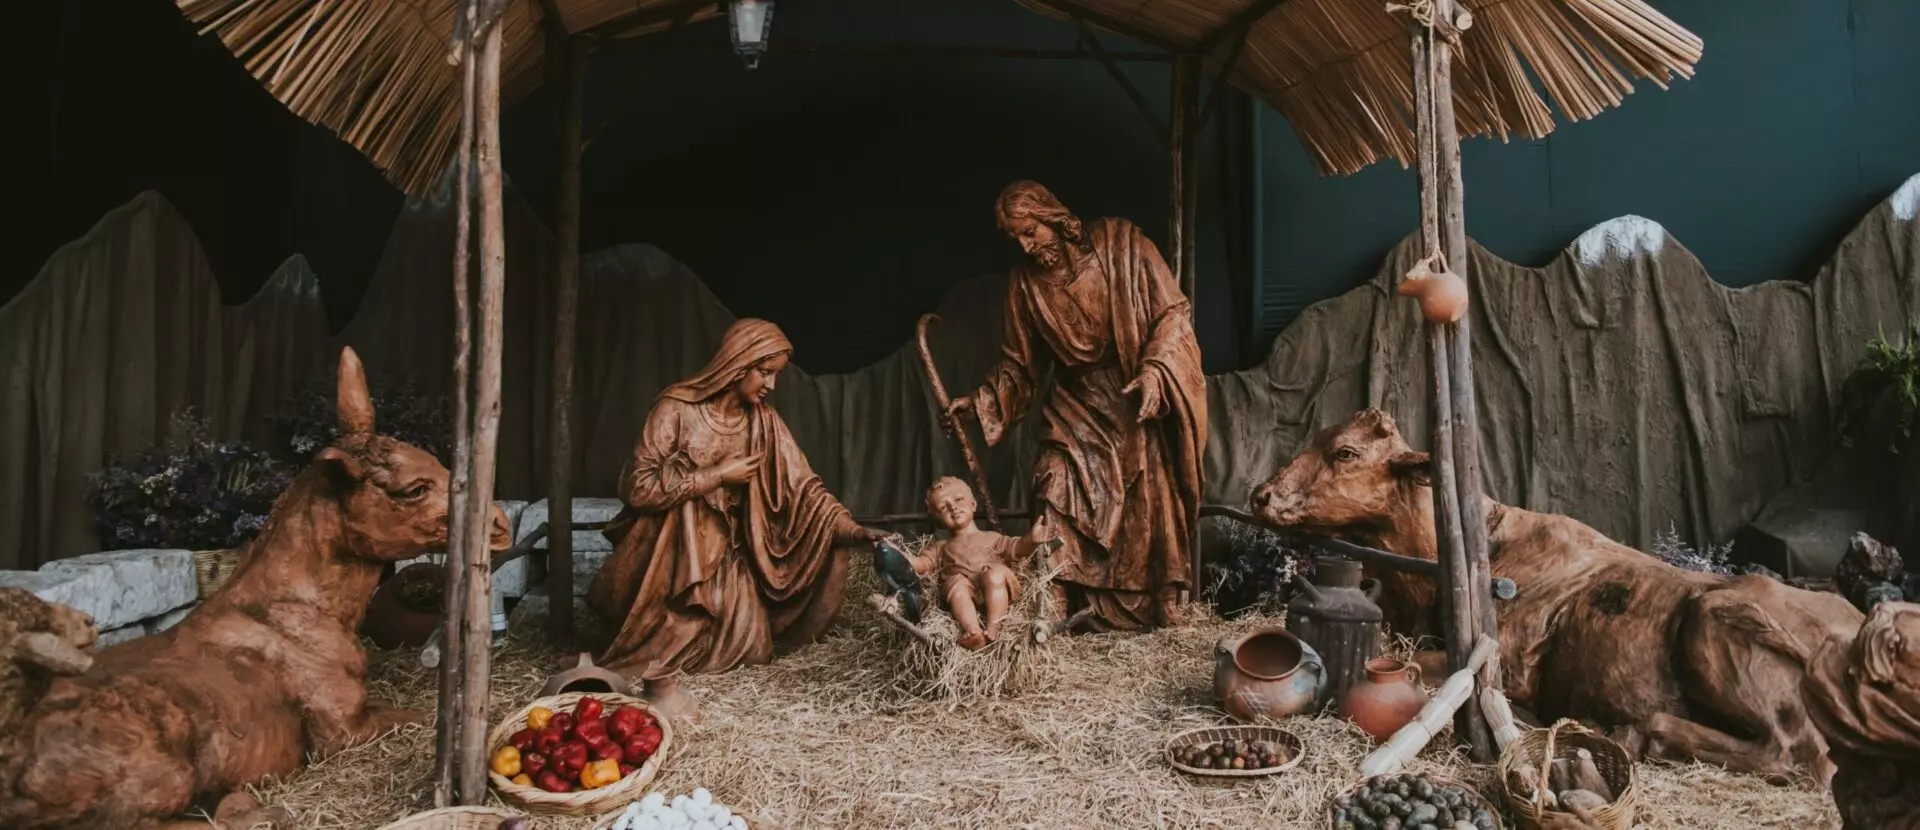 carved figurines depicting the birth of Jesus and the christmas story